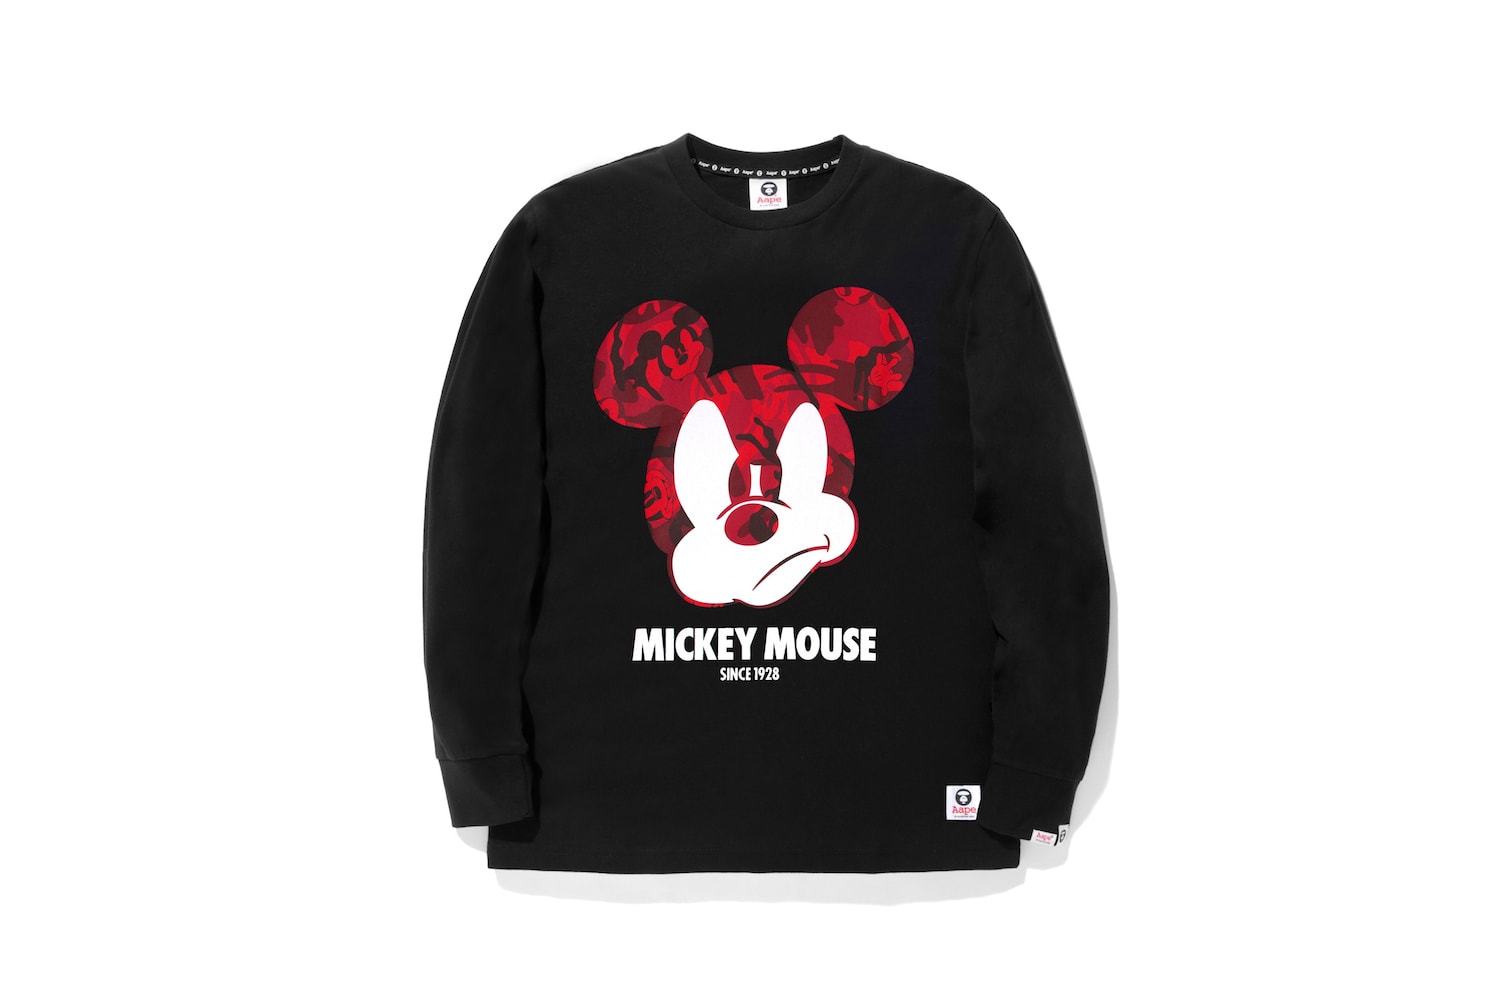 AAPE BY A BATHING APE® x Mickey Mouse 2016 Winter Collection